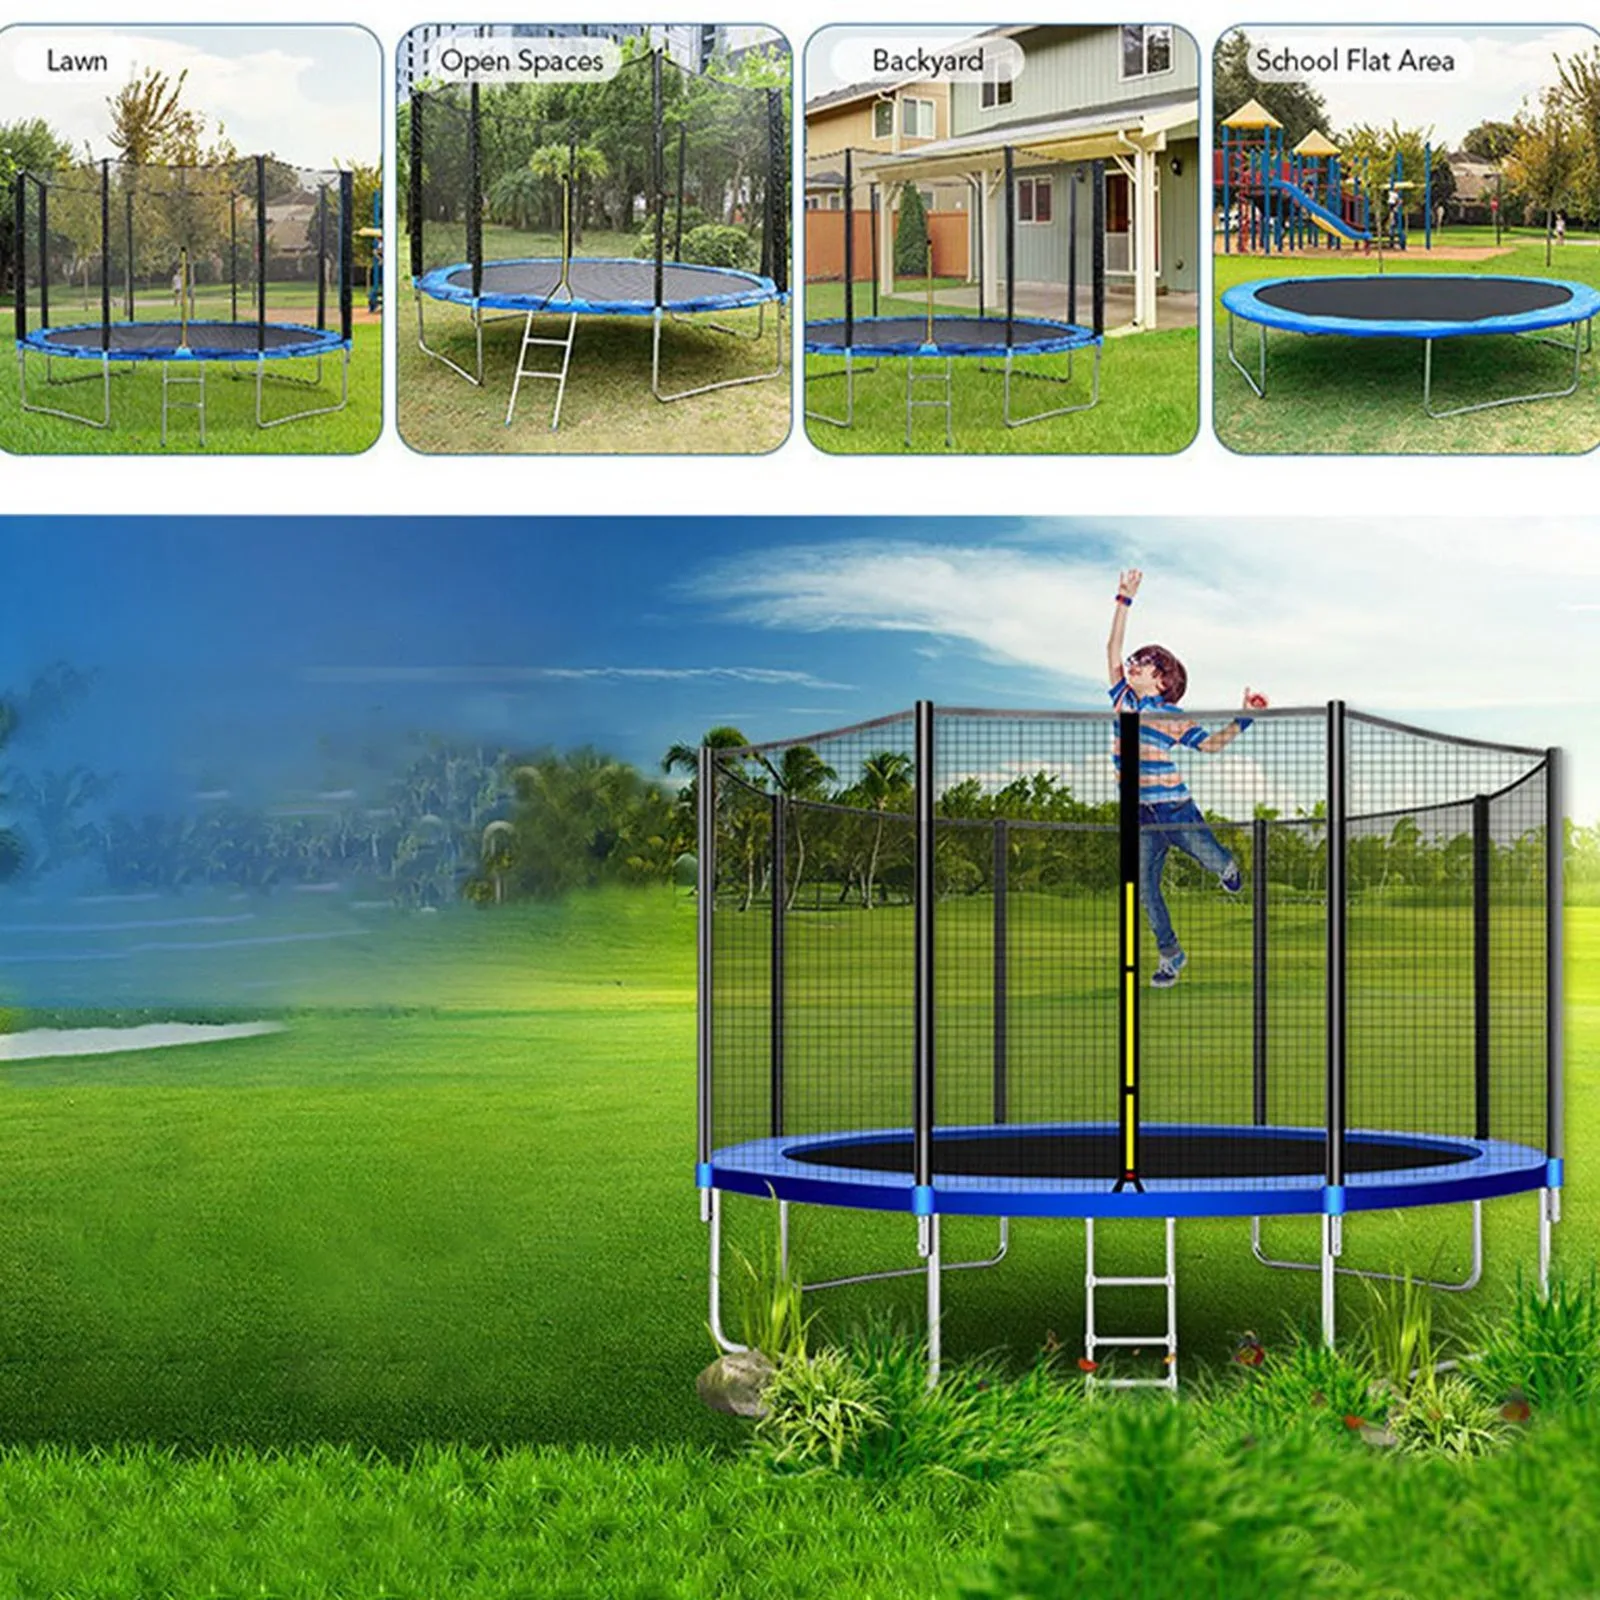 US $257.40 12FT Kids Trampoline With Enclosure Net Jumping Mat And Spring Cover Padding Multifunction Sports Gym Exercise Equipment USW